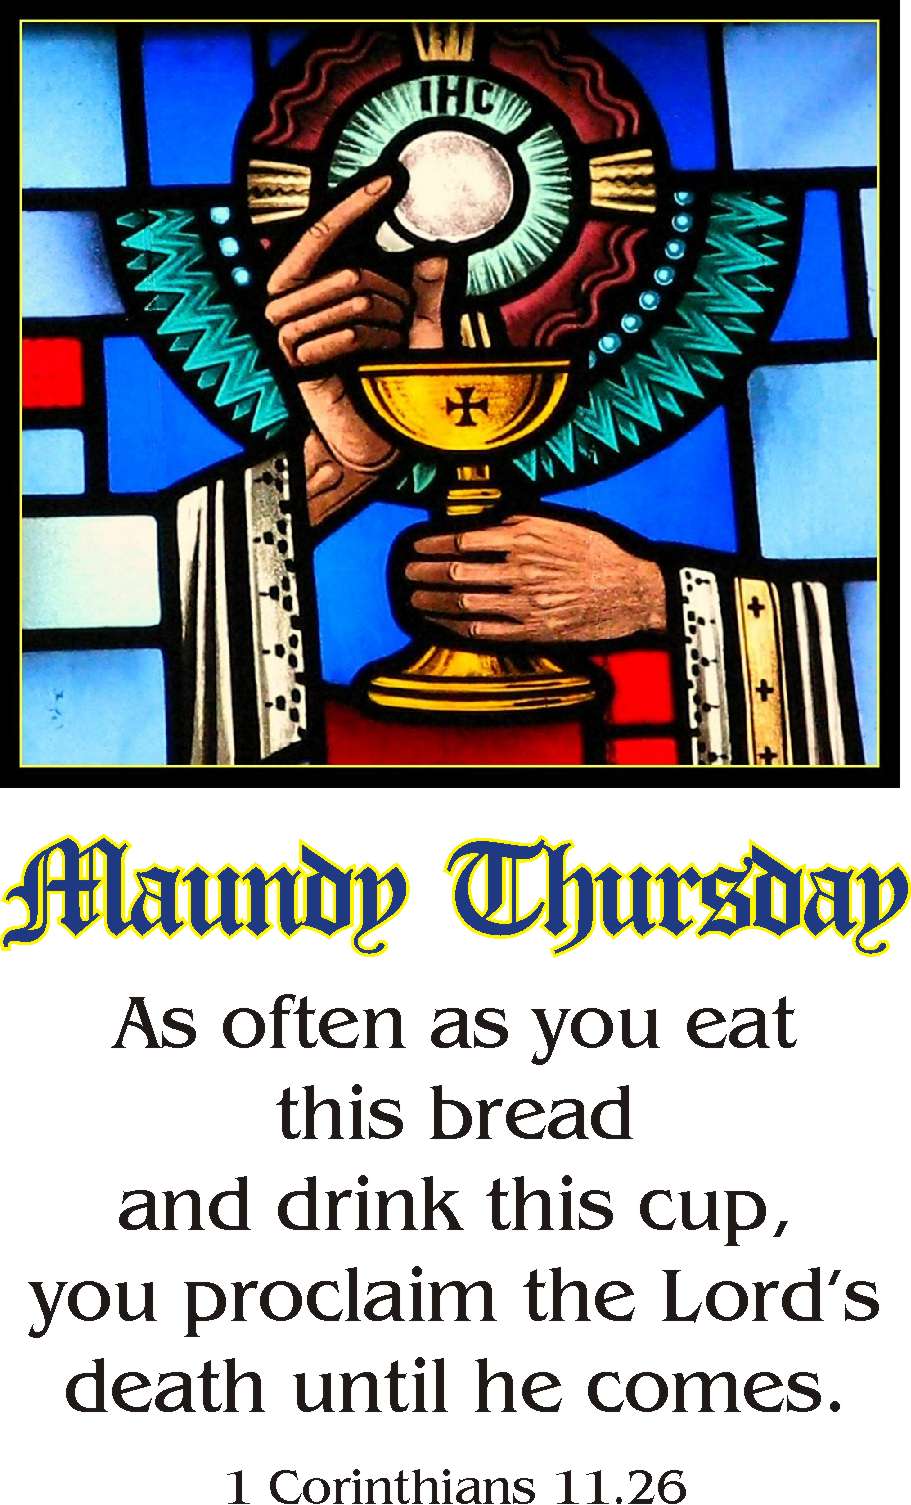 Pin Maundy Thursday Clip Art Image Search Results On Pinterest